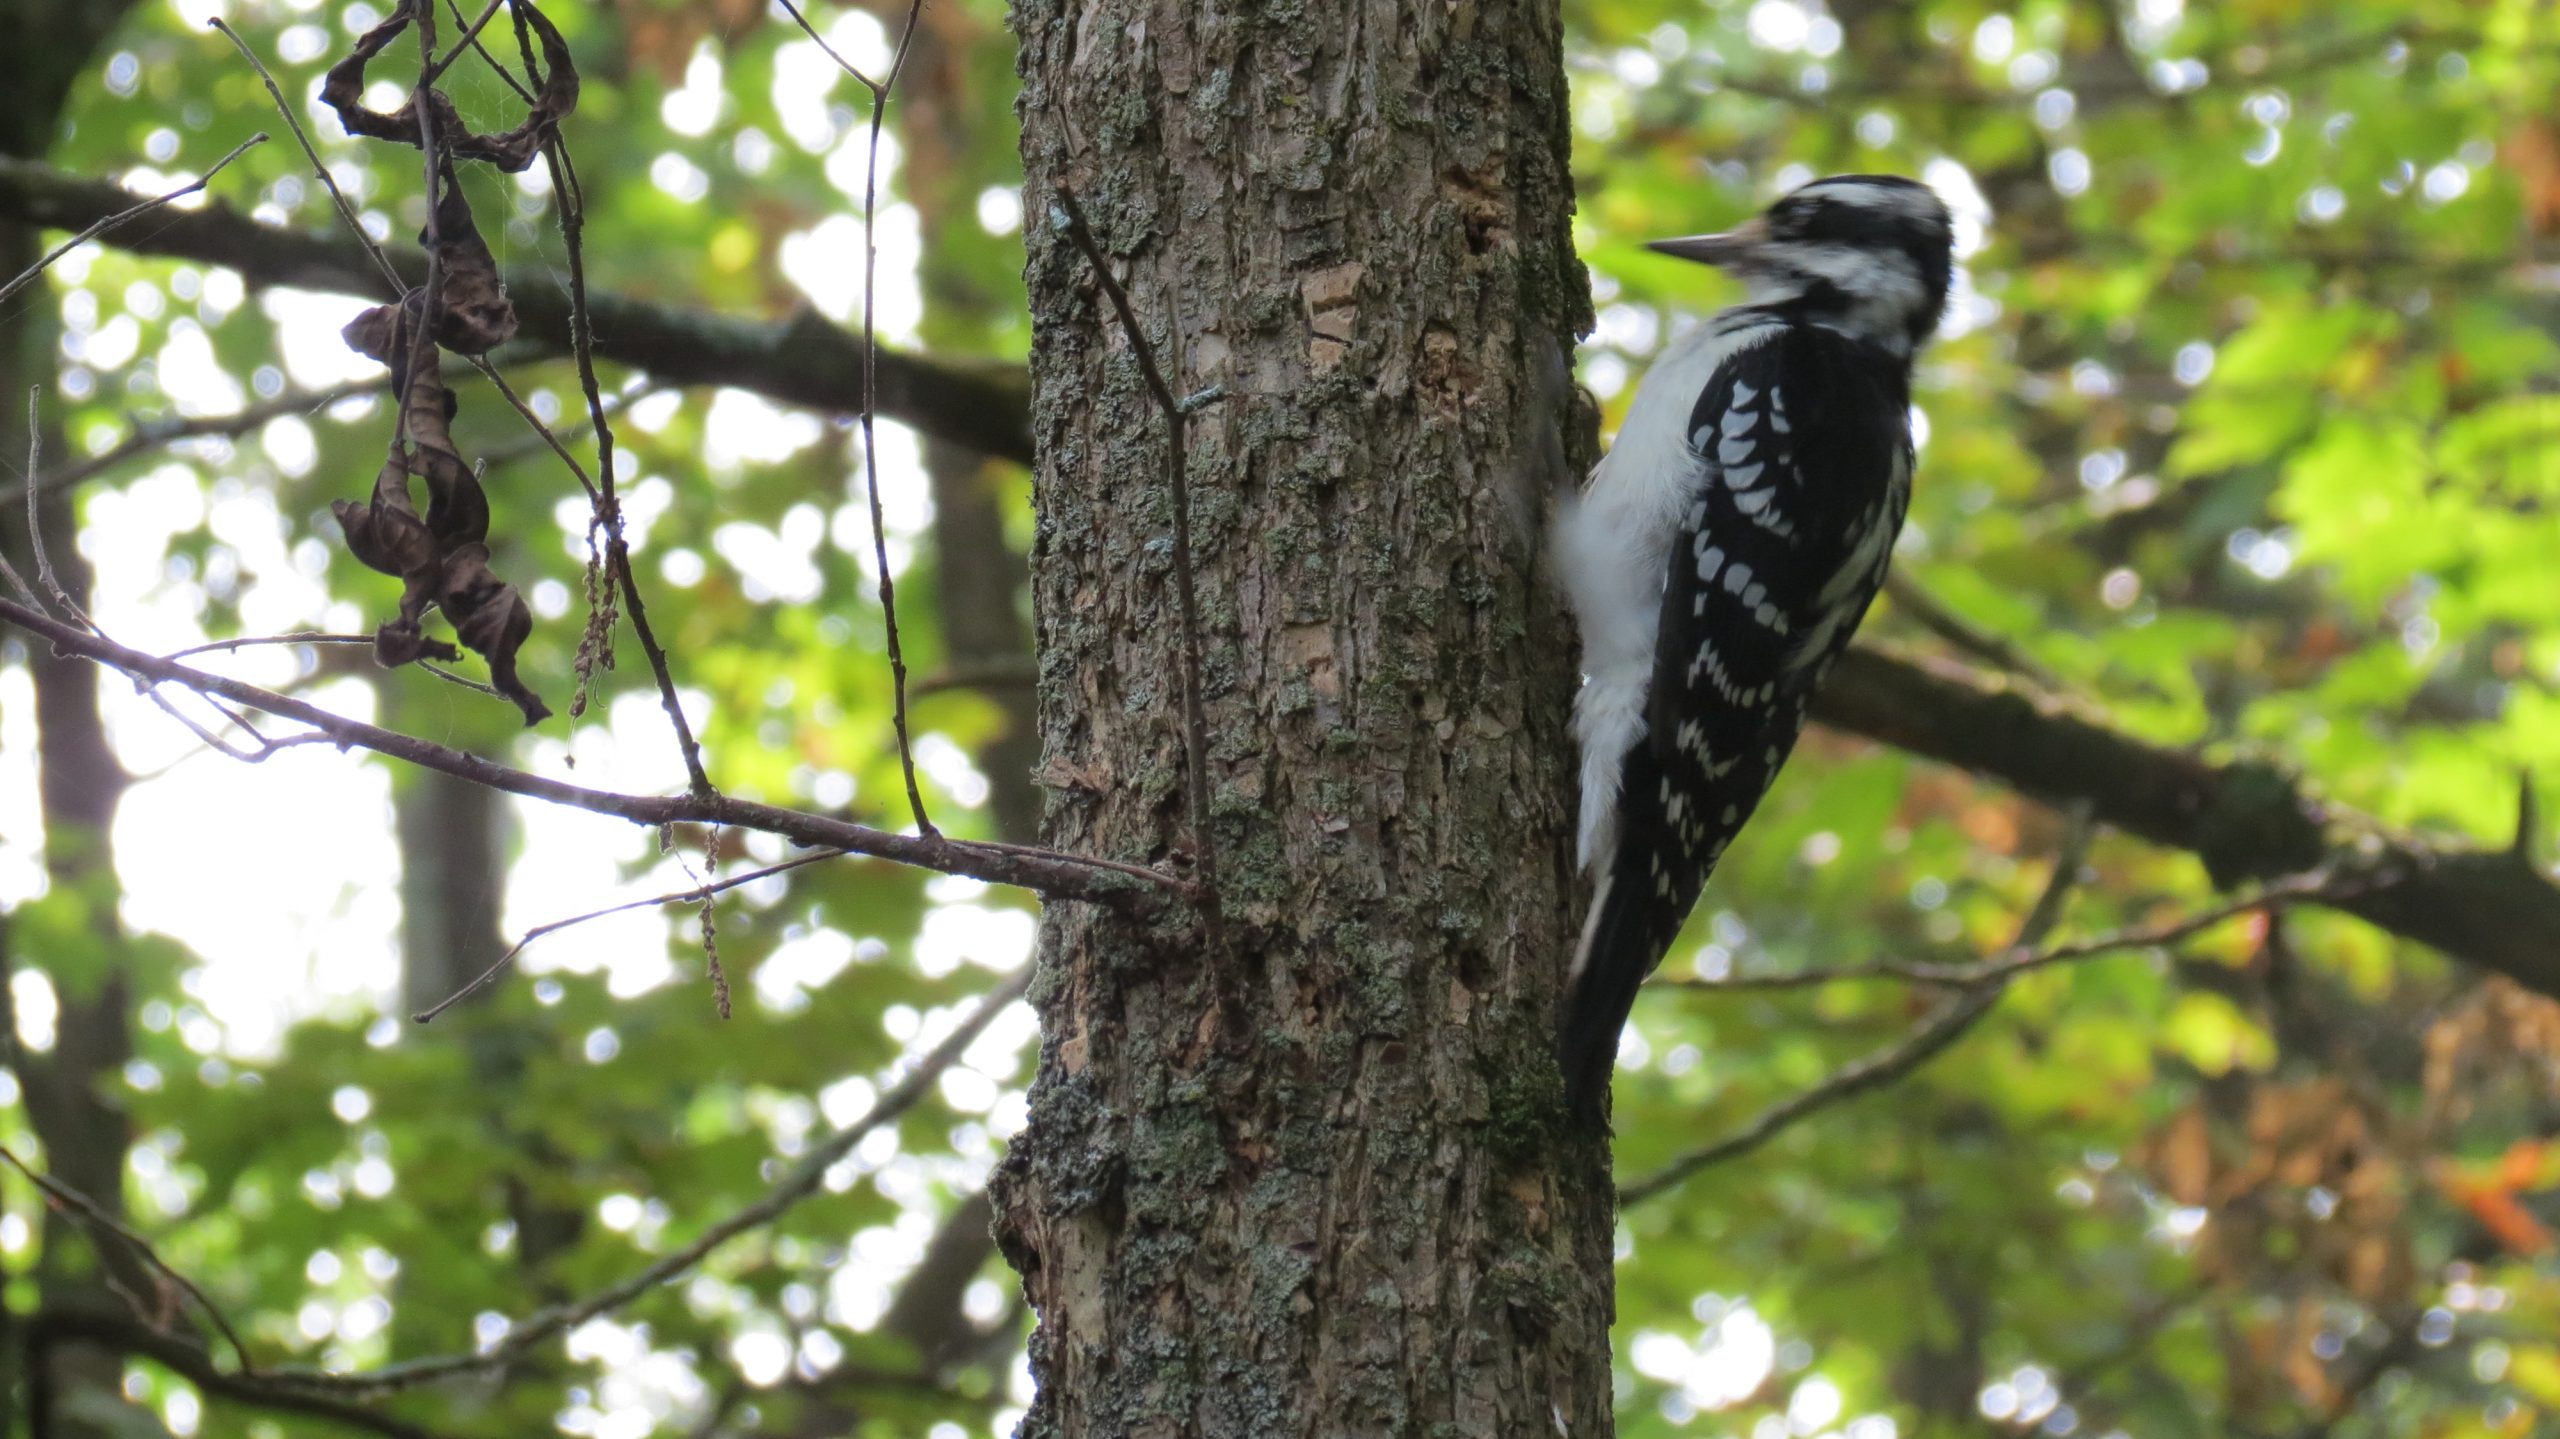 A hairy woodpecker, with black and white markings, on a tree hunting for insects in Taylor Creek Park.